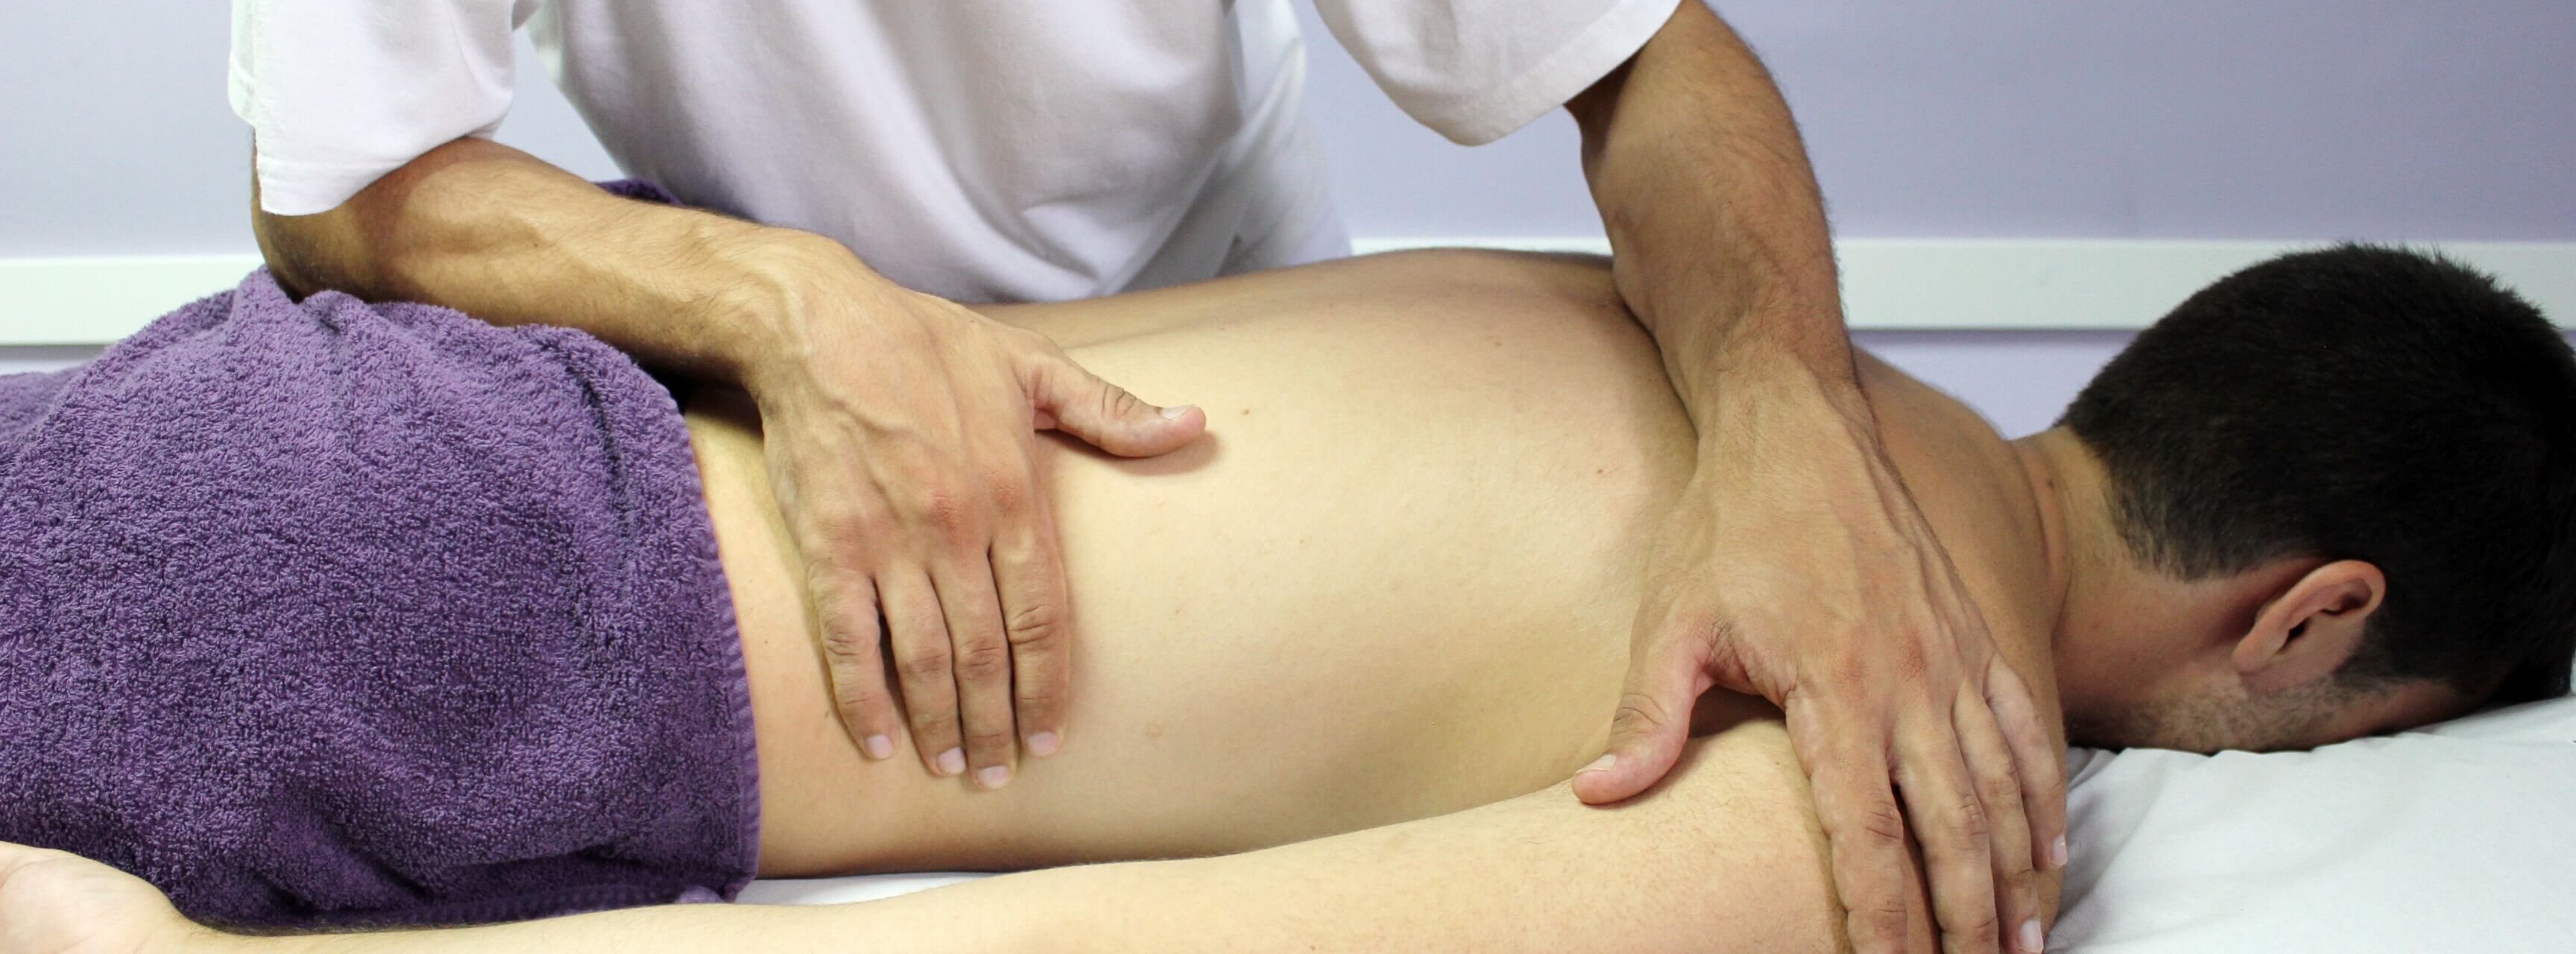 Chiropractor treating a patient